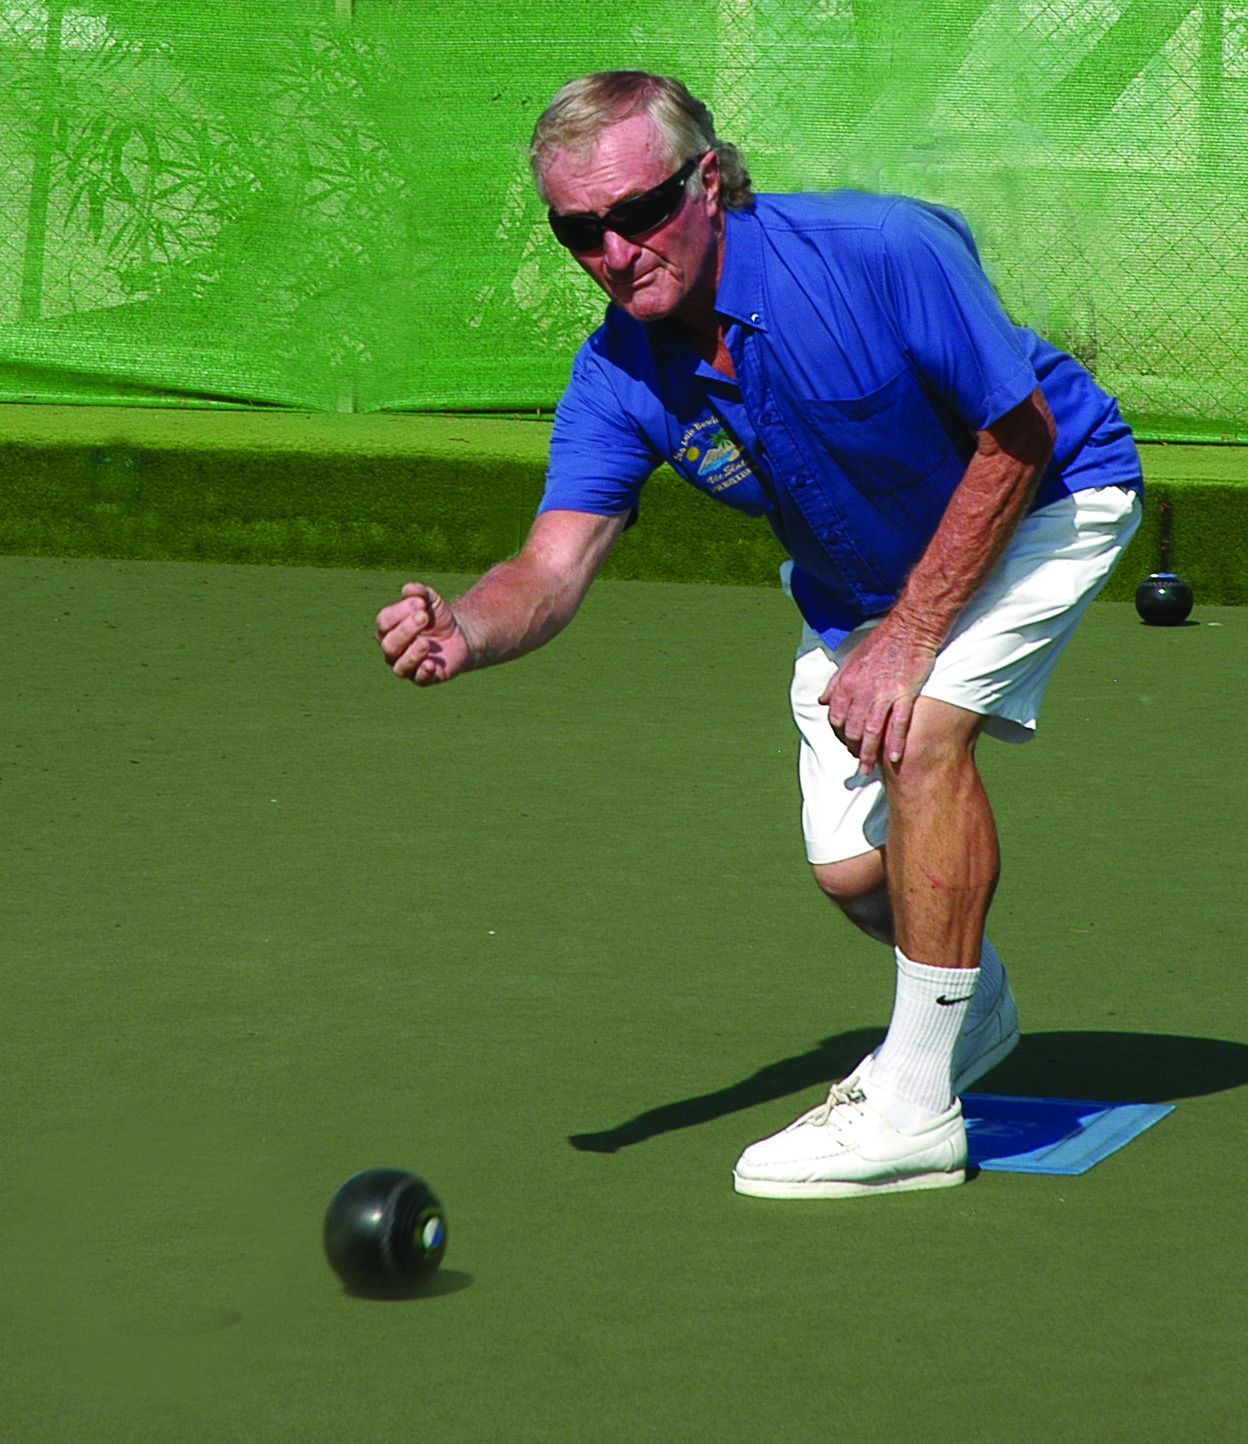 Vic Slater the propetor of San Luis Bowls Club